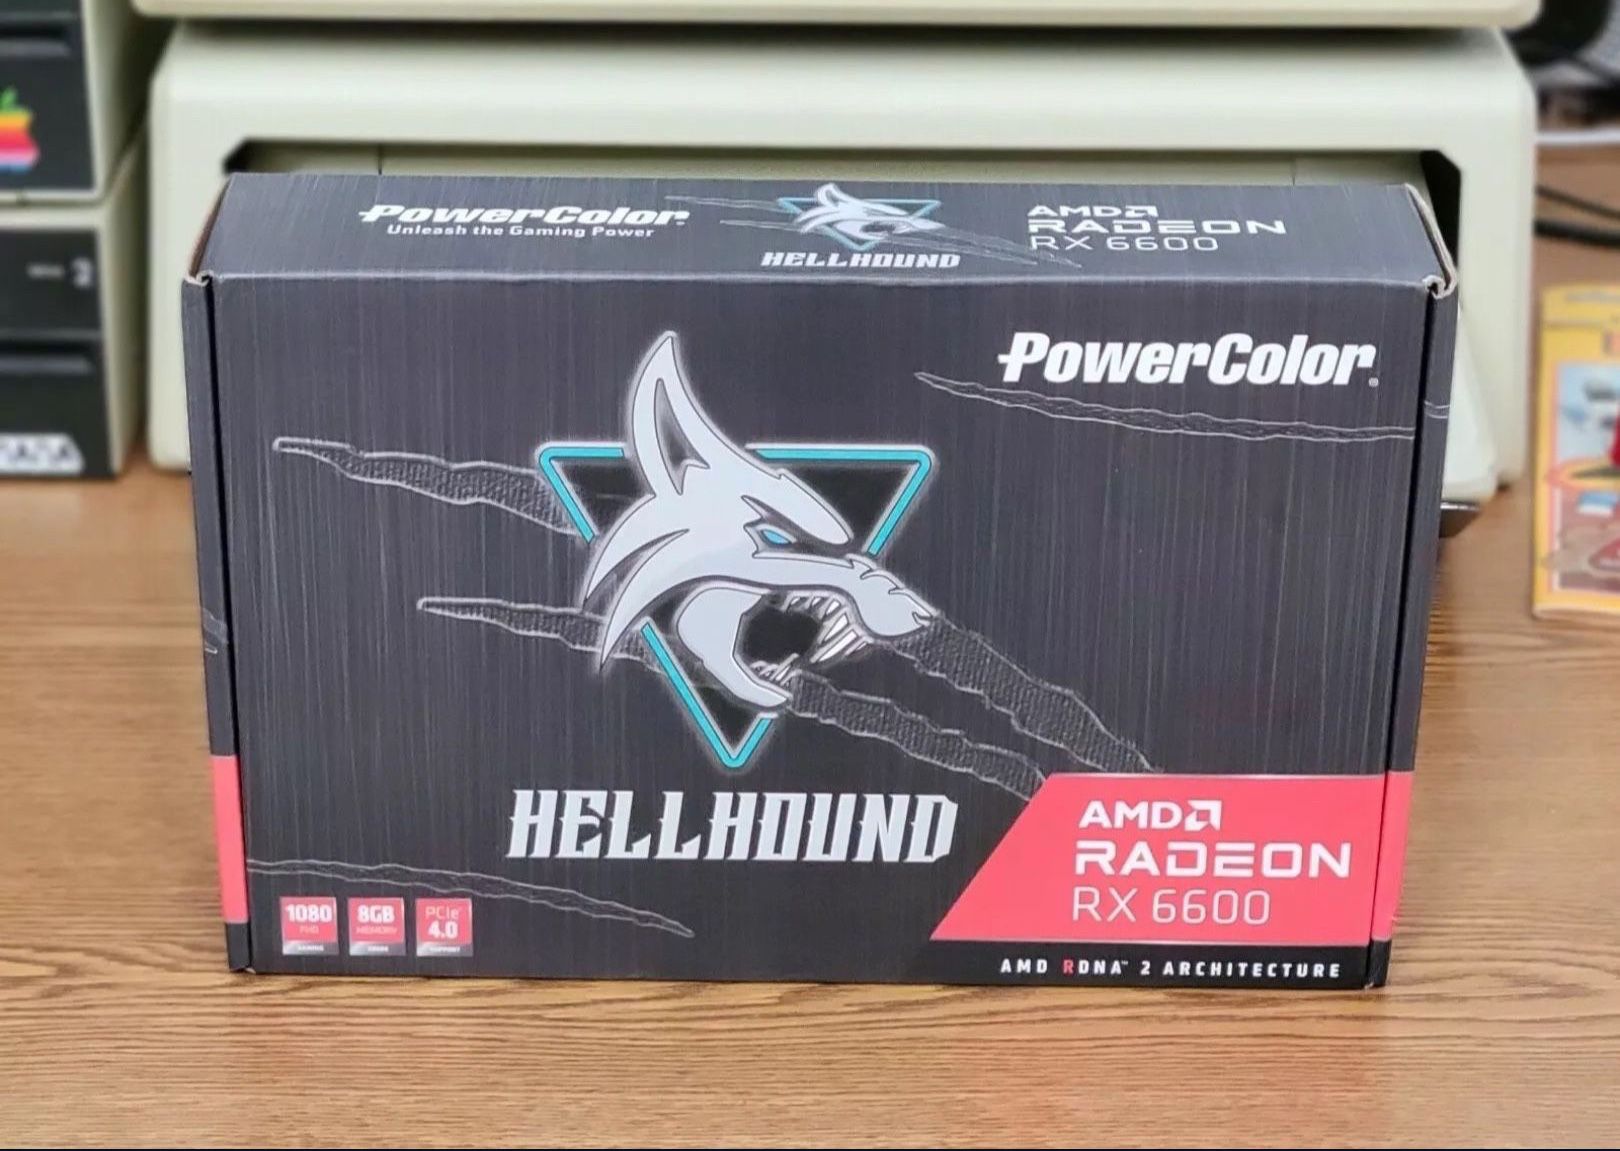 PowerColor Hellhound AMD Radeon RX 6600 Gaming Graphics Card with 8GB GDDR6 Memory, Powered by AMD RDNA 2, HDMI 2.1